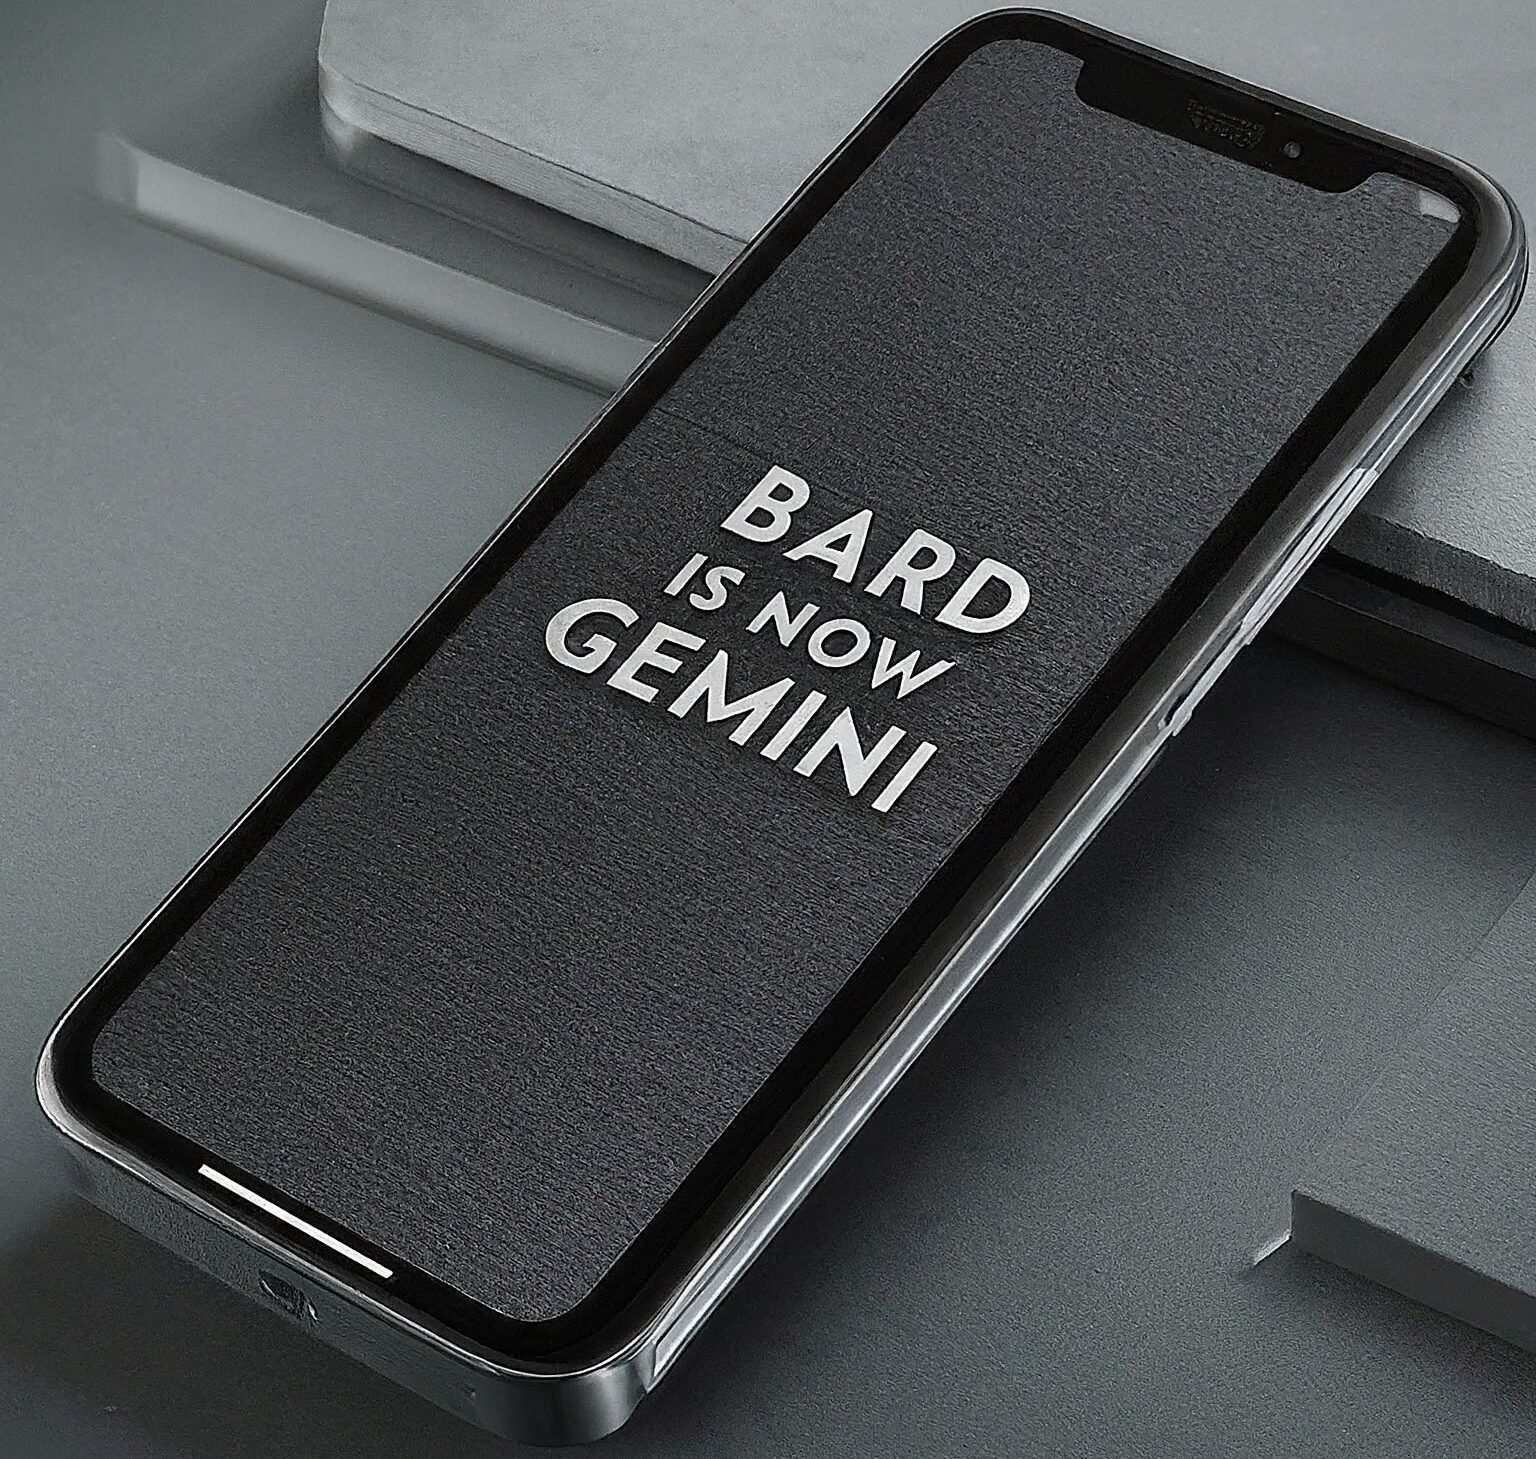 Bard is now gemini is written on mobile phone screen with quesion what is bard google?